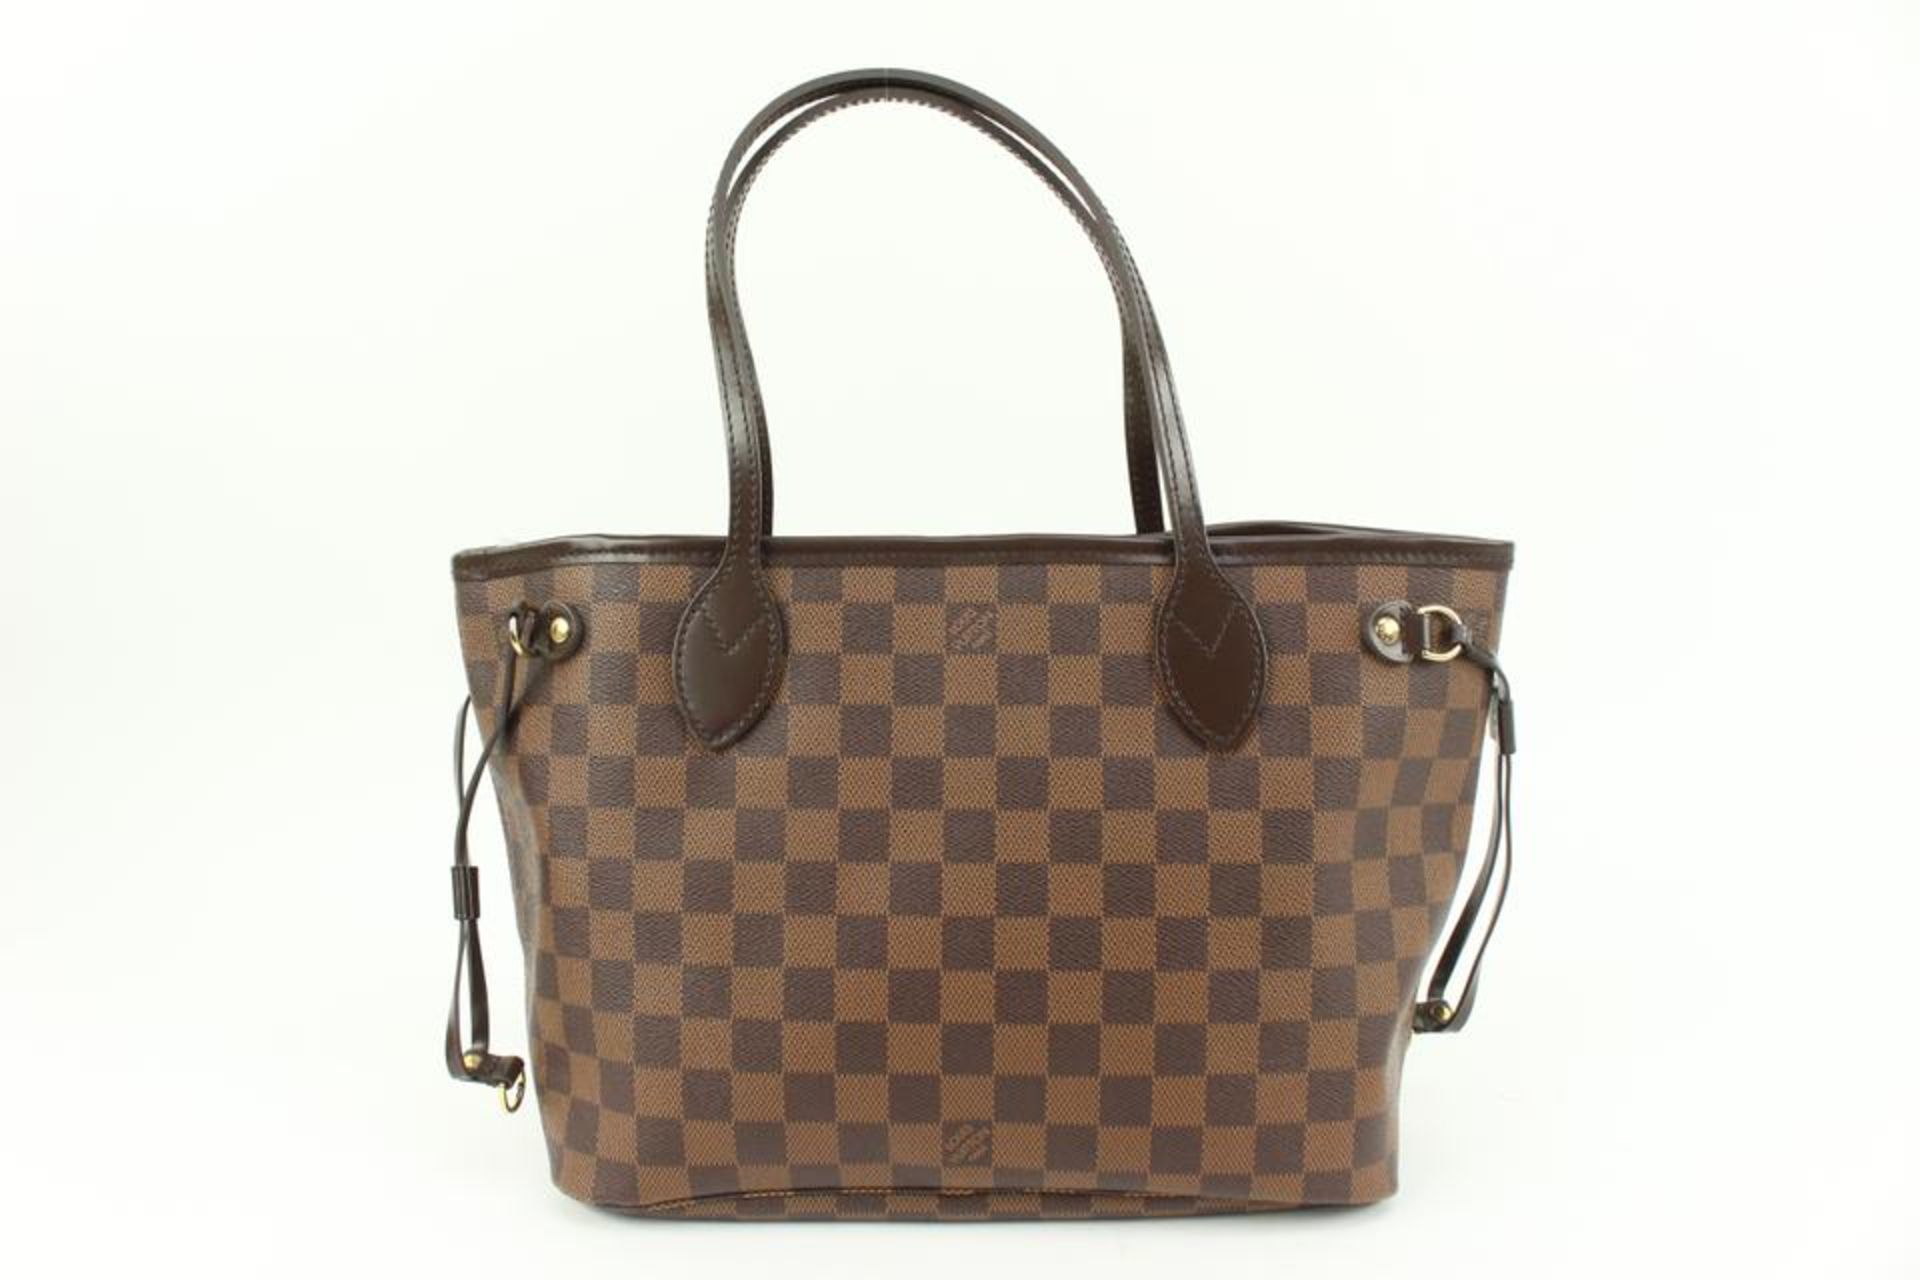 LOUIS VUITTON SMALL DAMIER EBENE NEVERFULL PM TOTE - Image 10 of 14